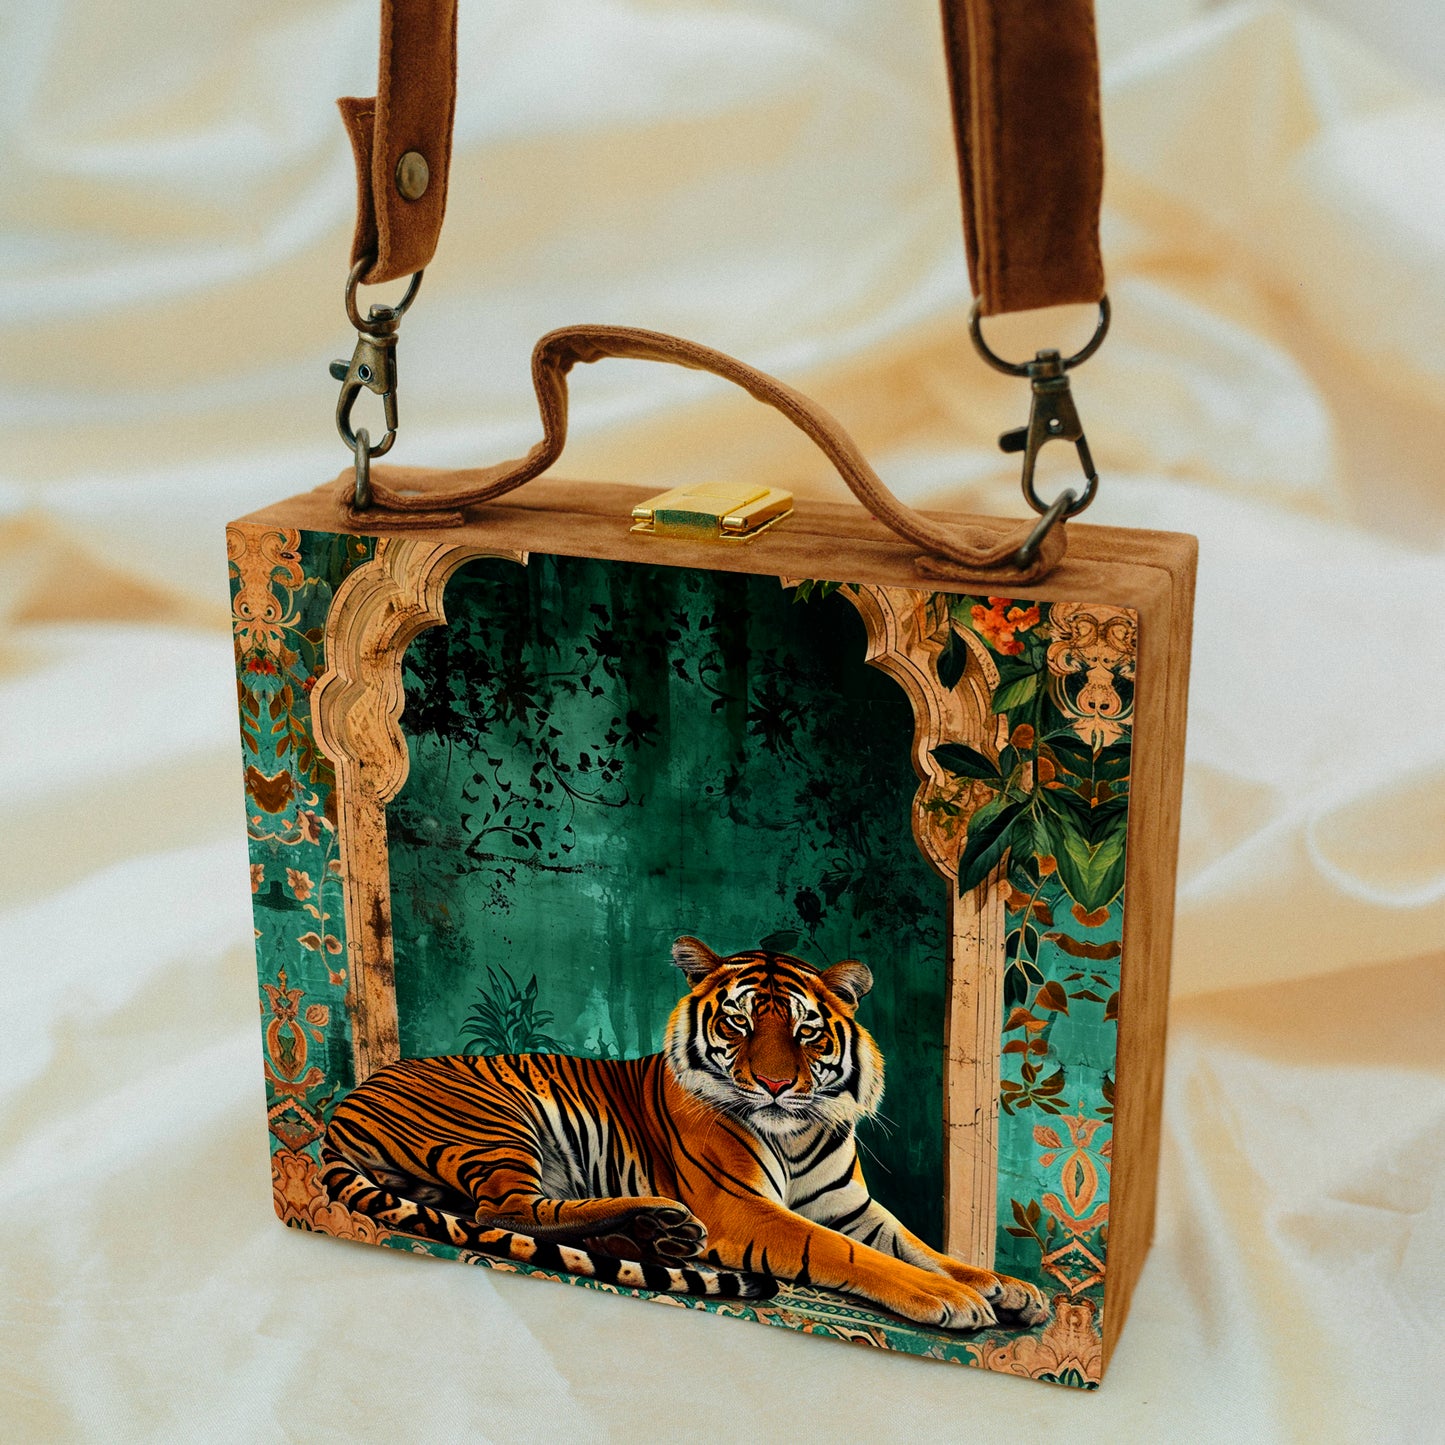 Tiger Printed Suitcase Style Clutch